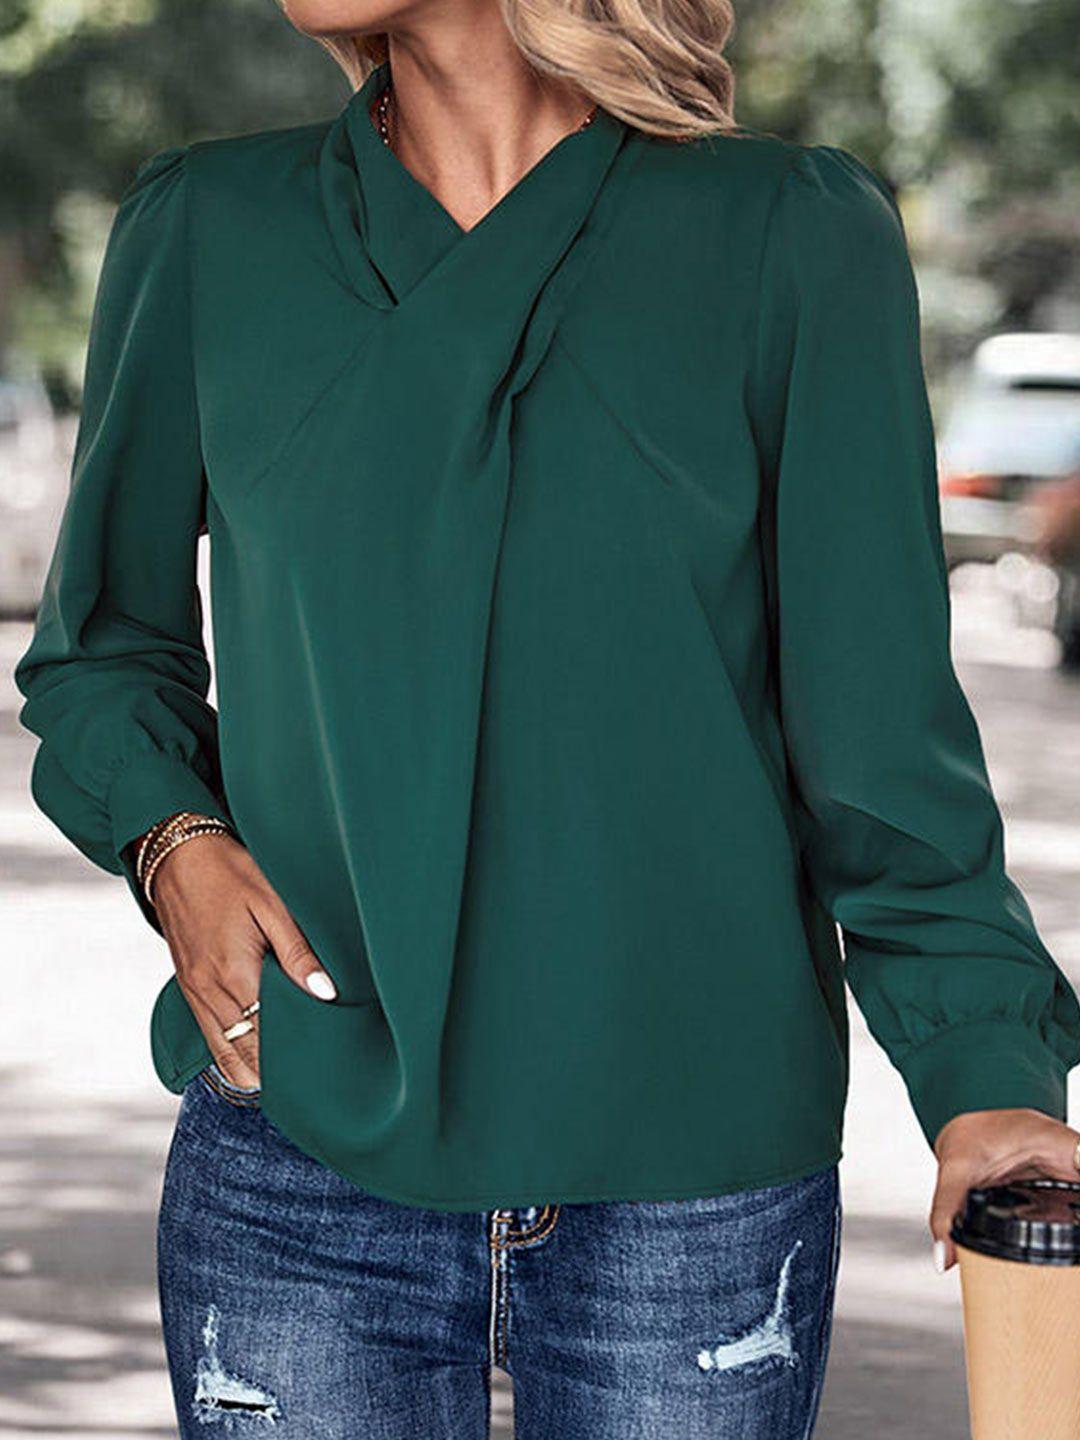 stylecast green high neck cuffed sleeves top